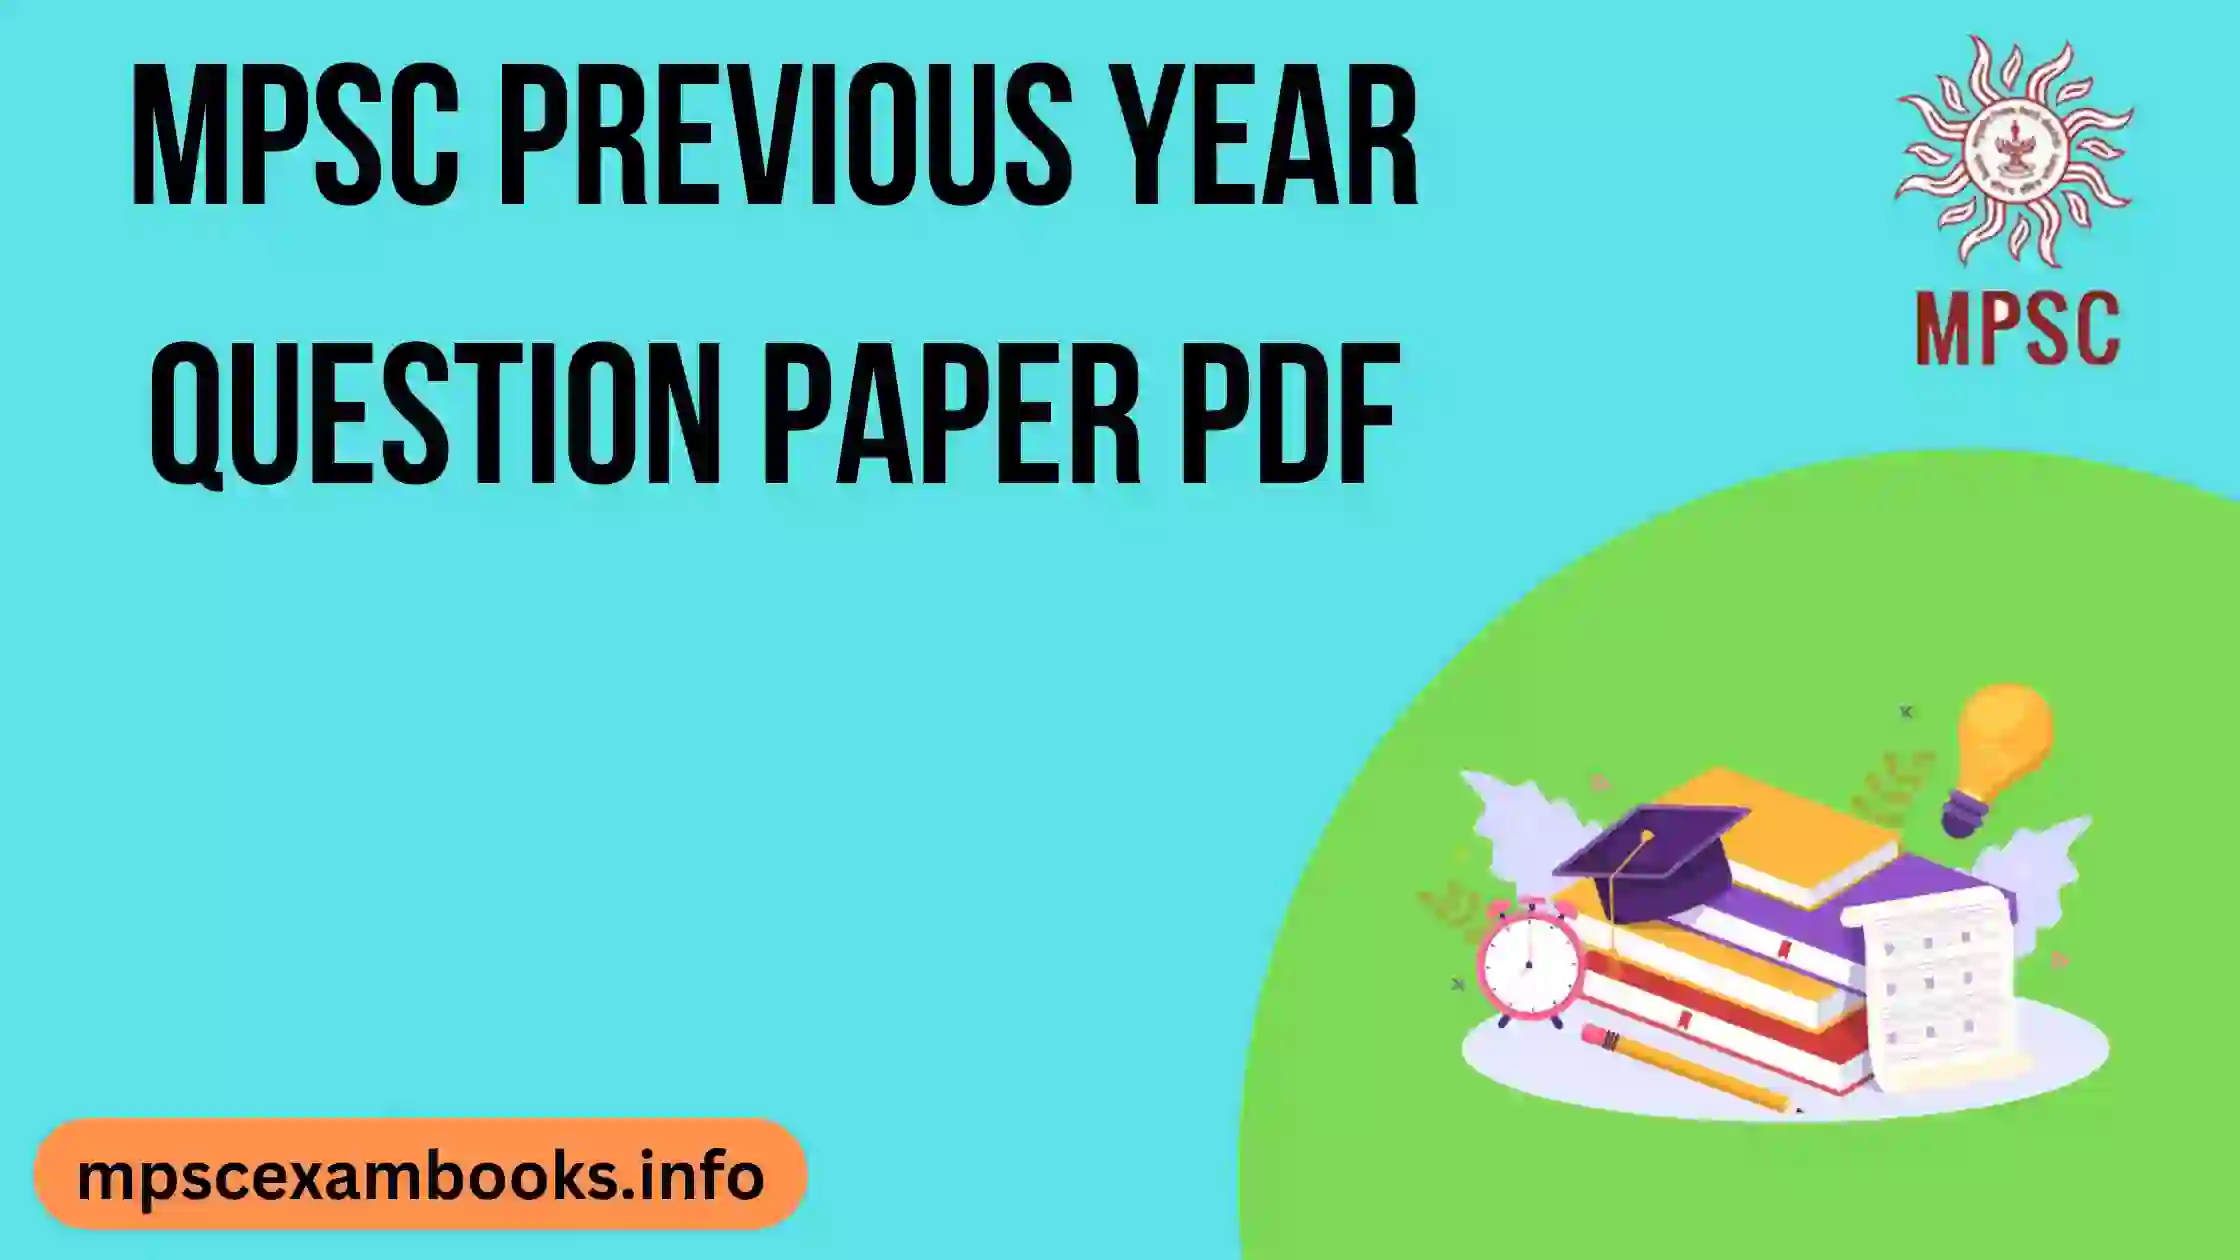 MPSC Previous Year Question Paper PDF